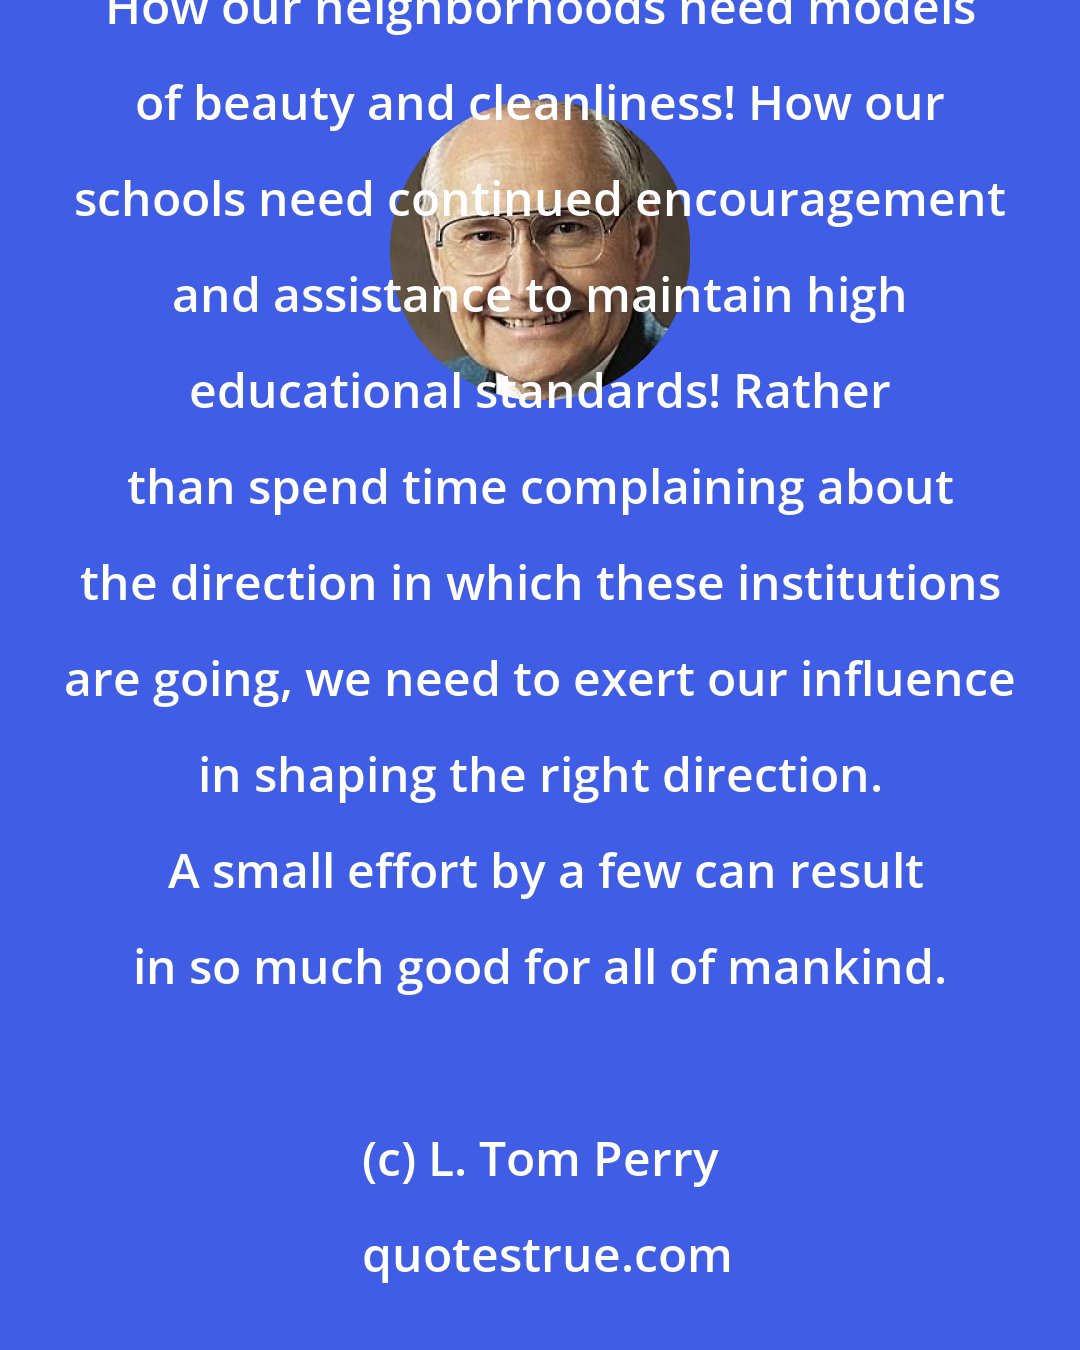 L. Tom Perry: How our governments need standards of integrity! How our communities need yardsticks to measure decency! How our neighborhoods need models of beauty and cleanliness! How our schools need continued encouragement and assistance to maintain high educational standards! Rather than spend time complaining about the direction in which these institutions are going, we need to exert our influence in shaping the right direction.  A small effort by a few can result in so much good for all of mankind.